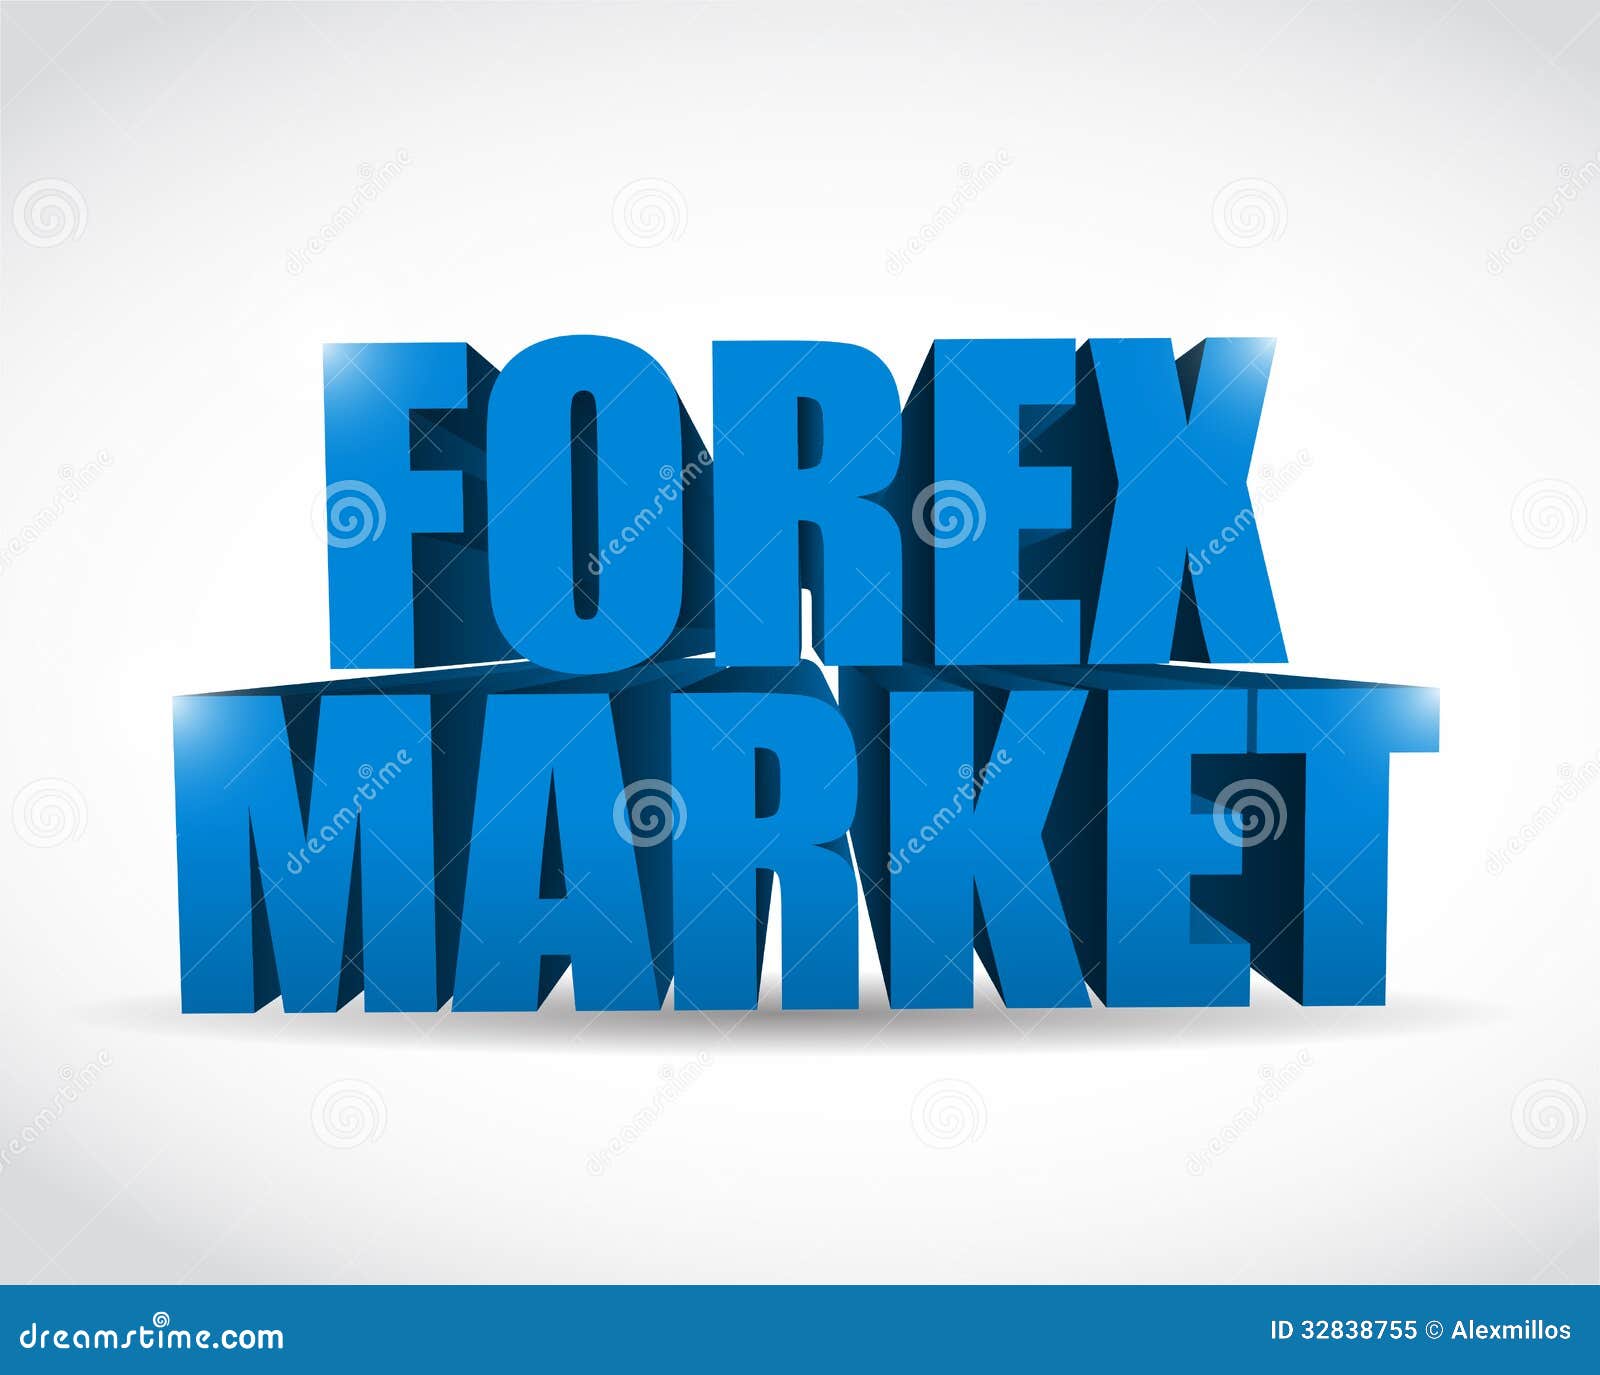 Sign in forex trading